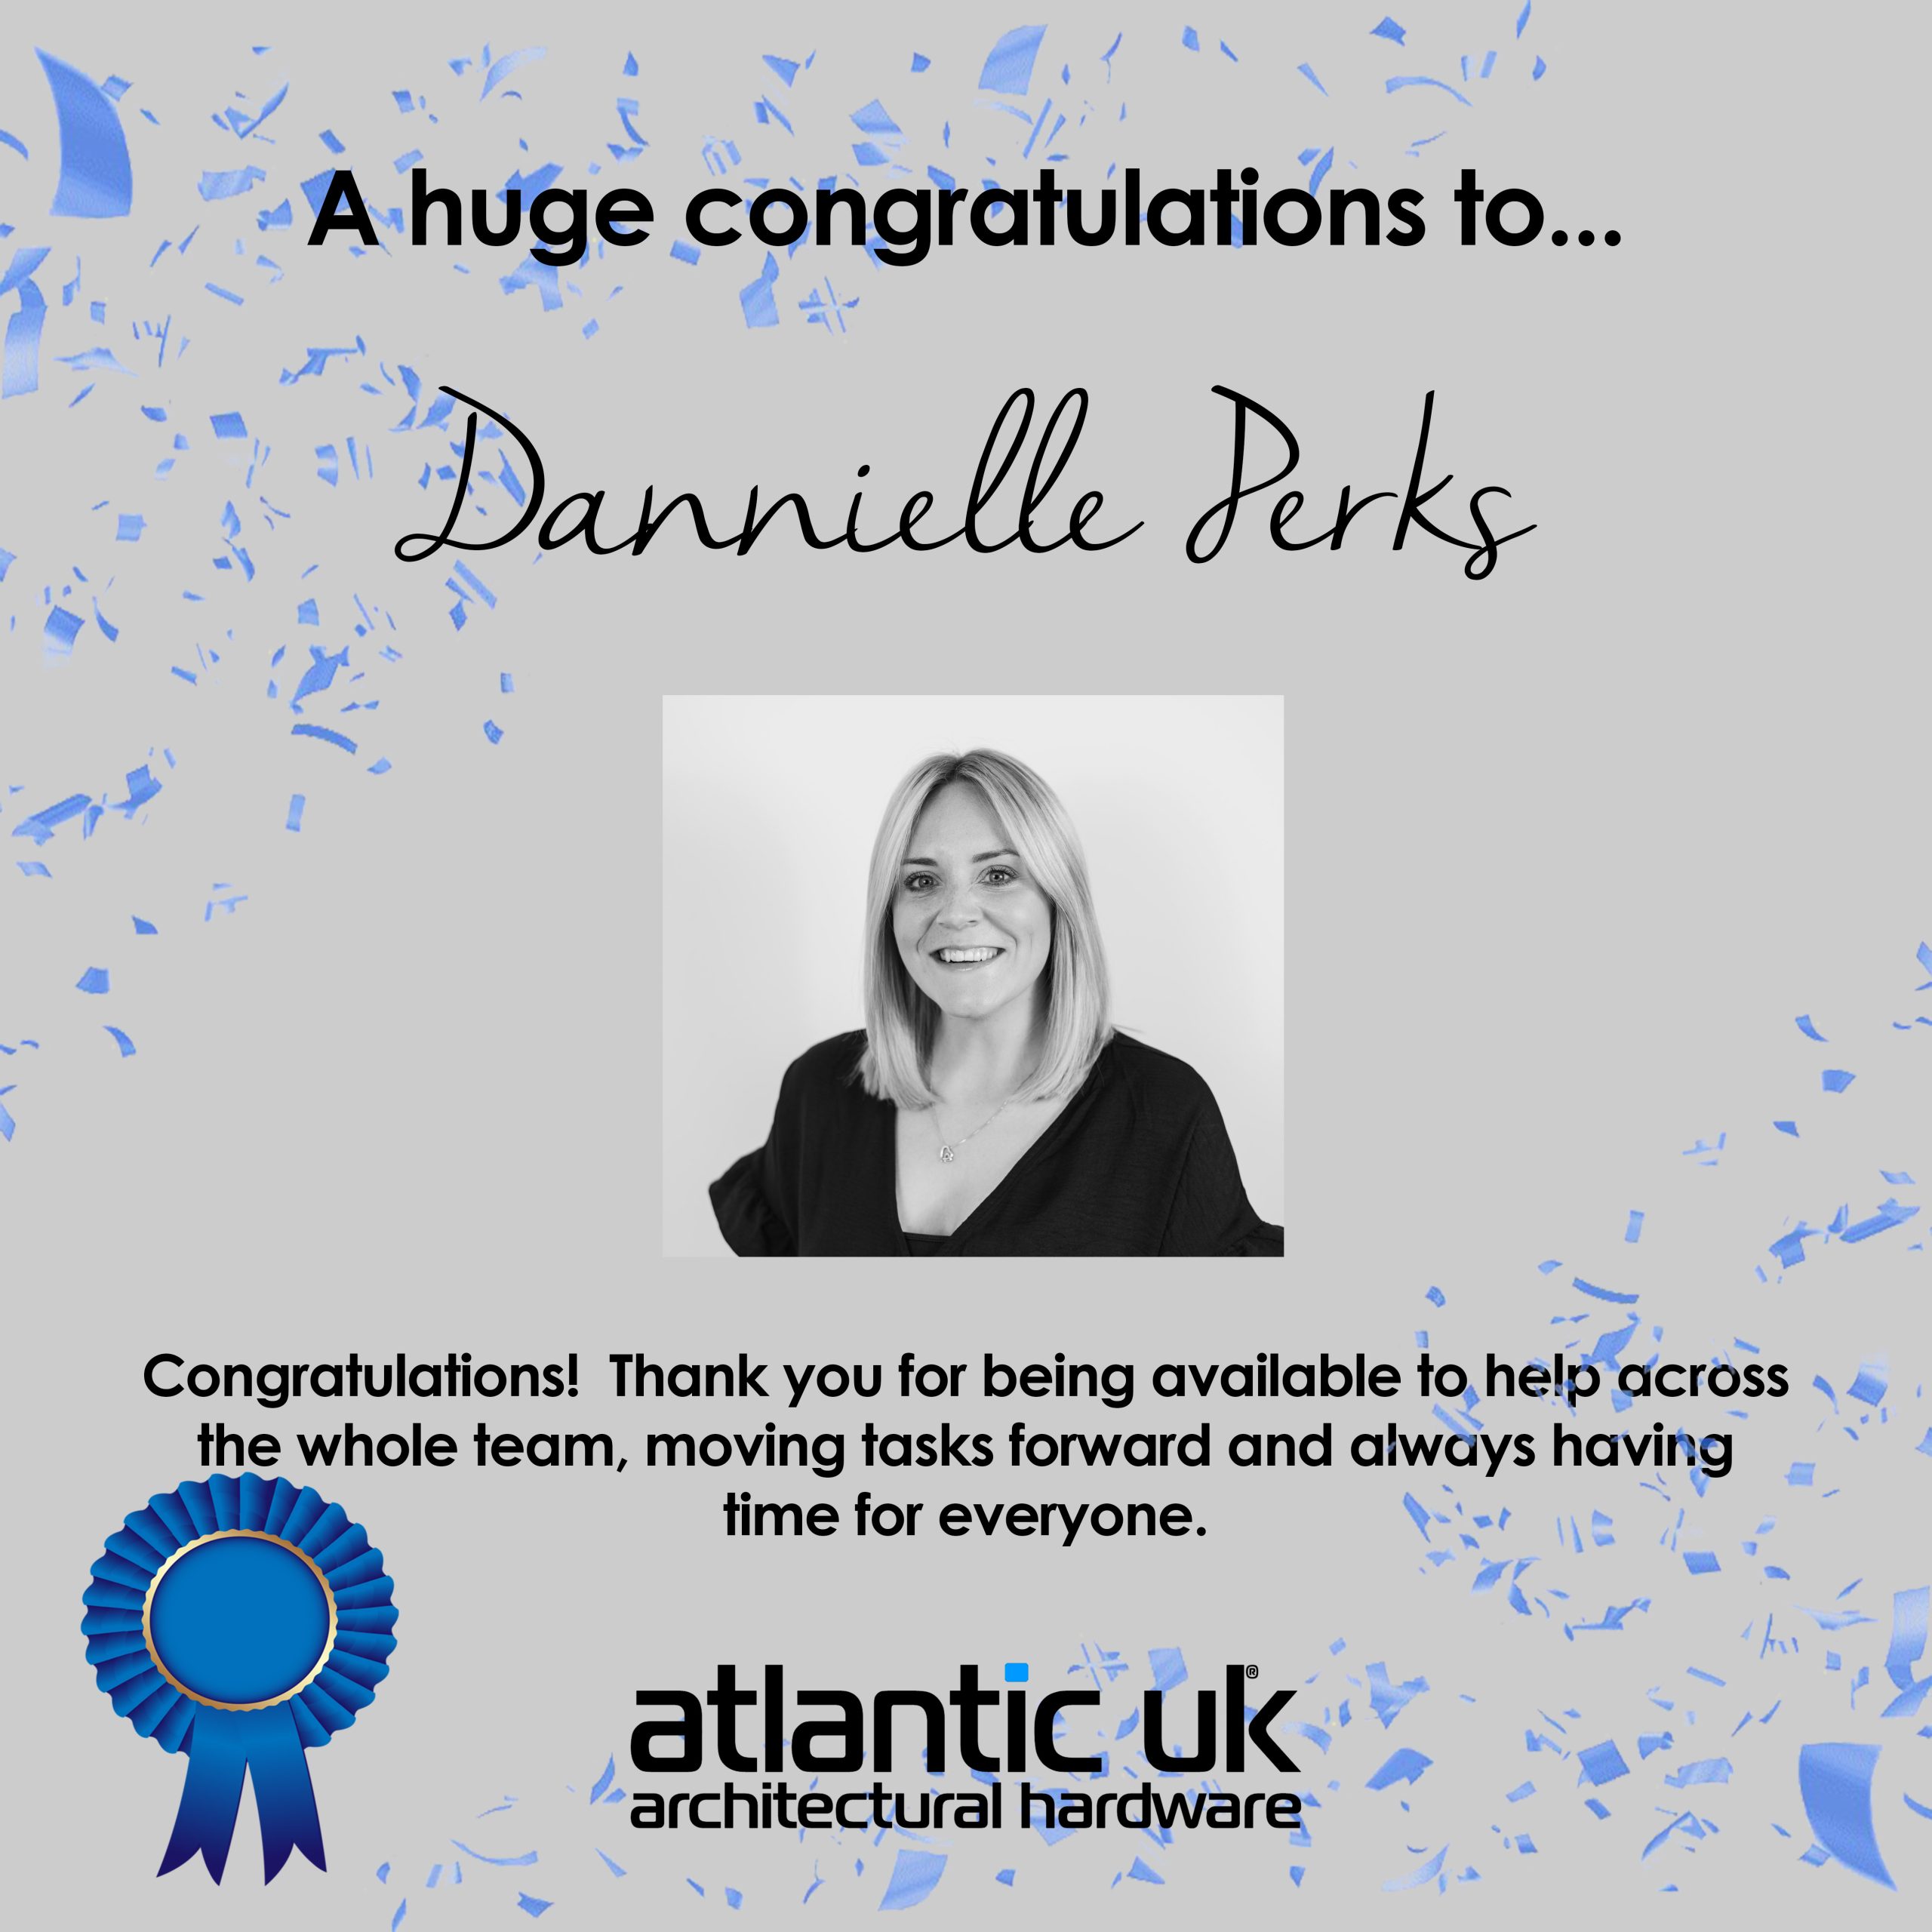 Congratulations Dannielle! Employee of the month for December! image